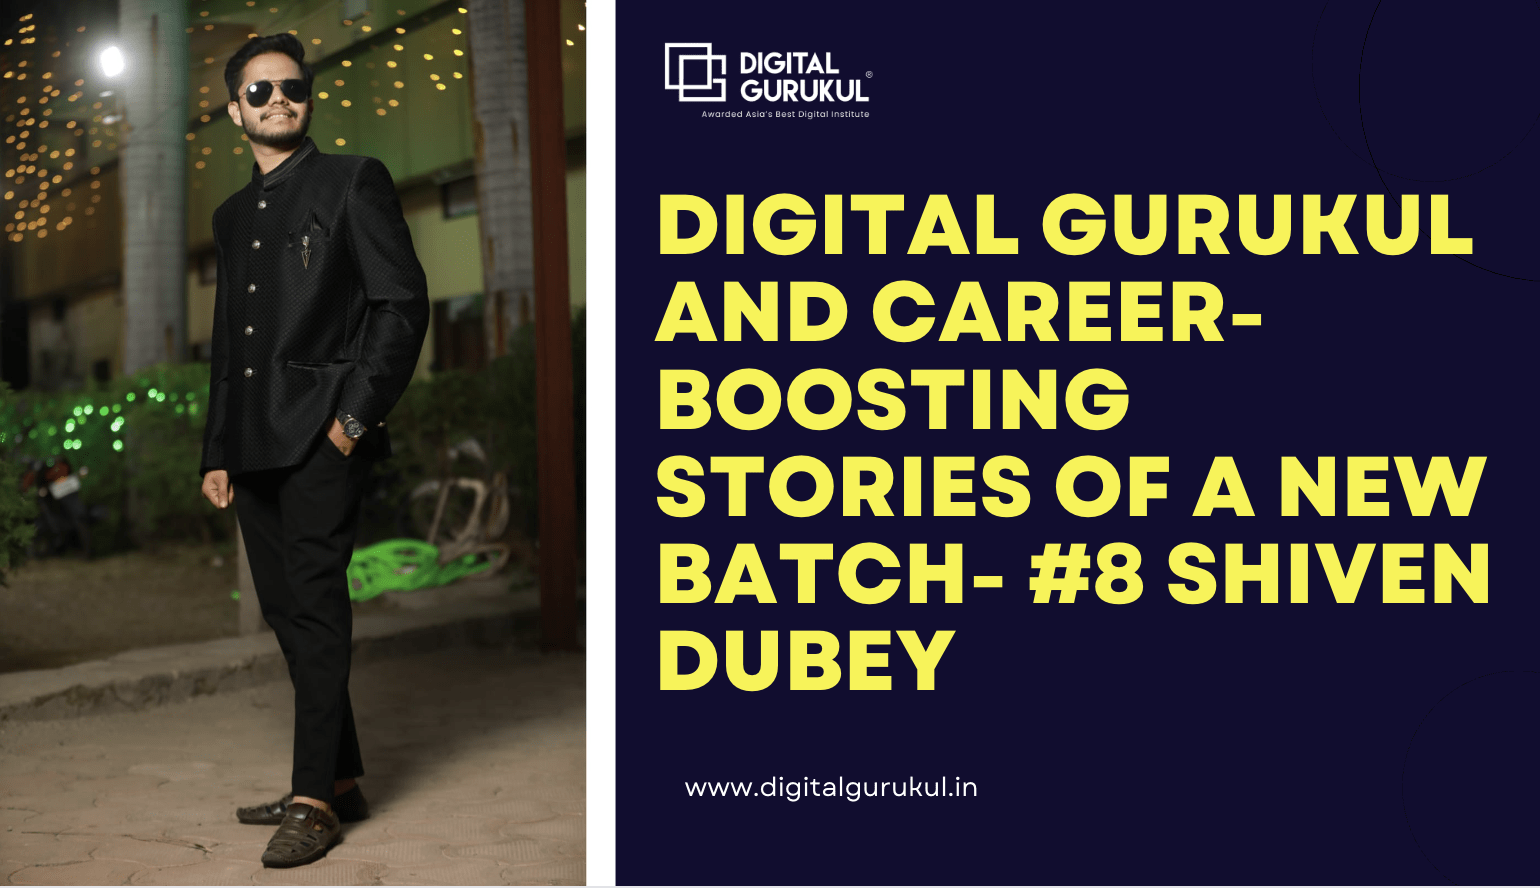 Digital Gurukul and career-boosting stories of a new batch- #8 Shiven Dubey